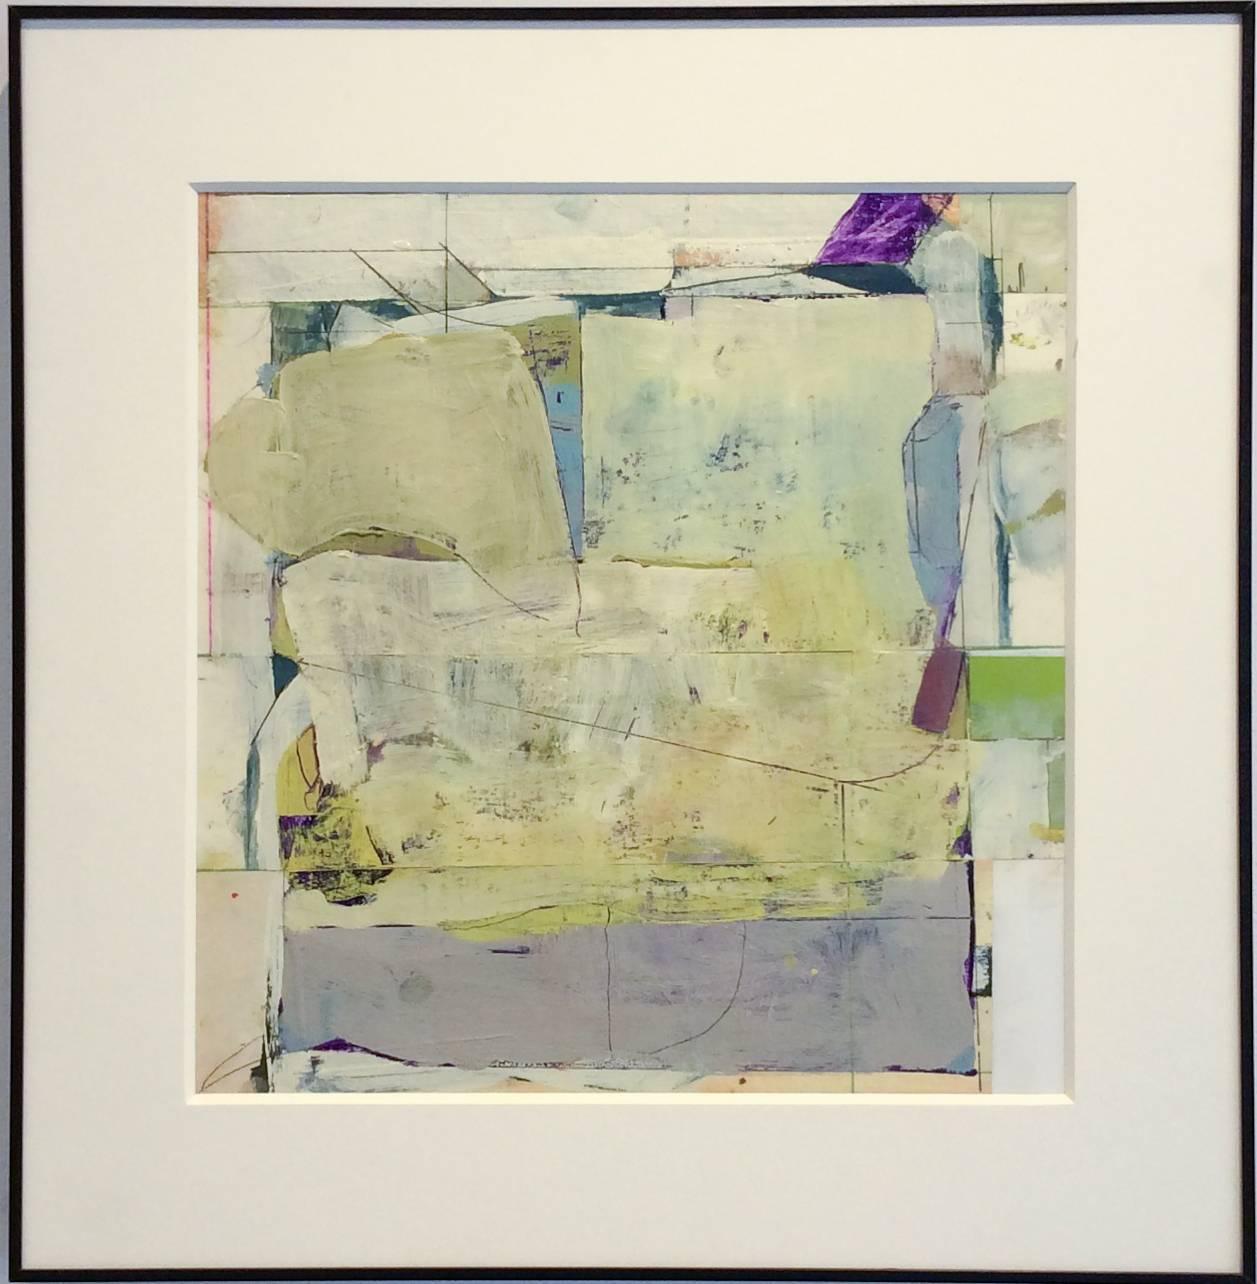 No. 74 (Abstract Mixed Media Work on Paper in Pale Chartreuse) - Contemporary Mixed Media Art by James O'Shea